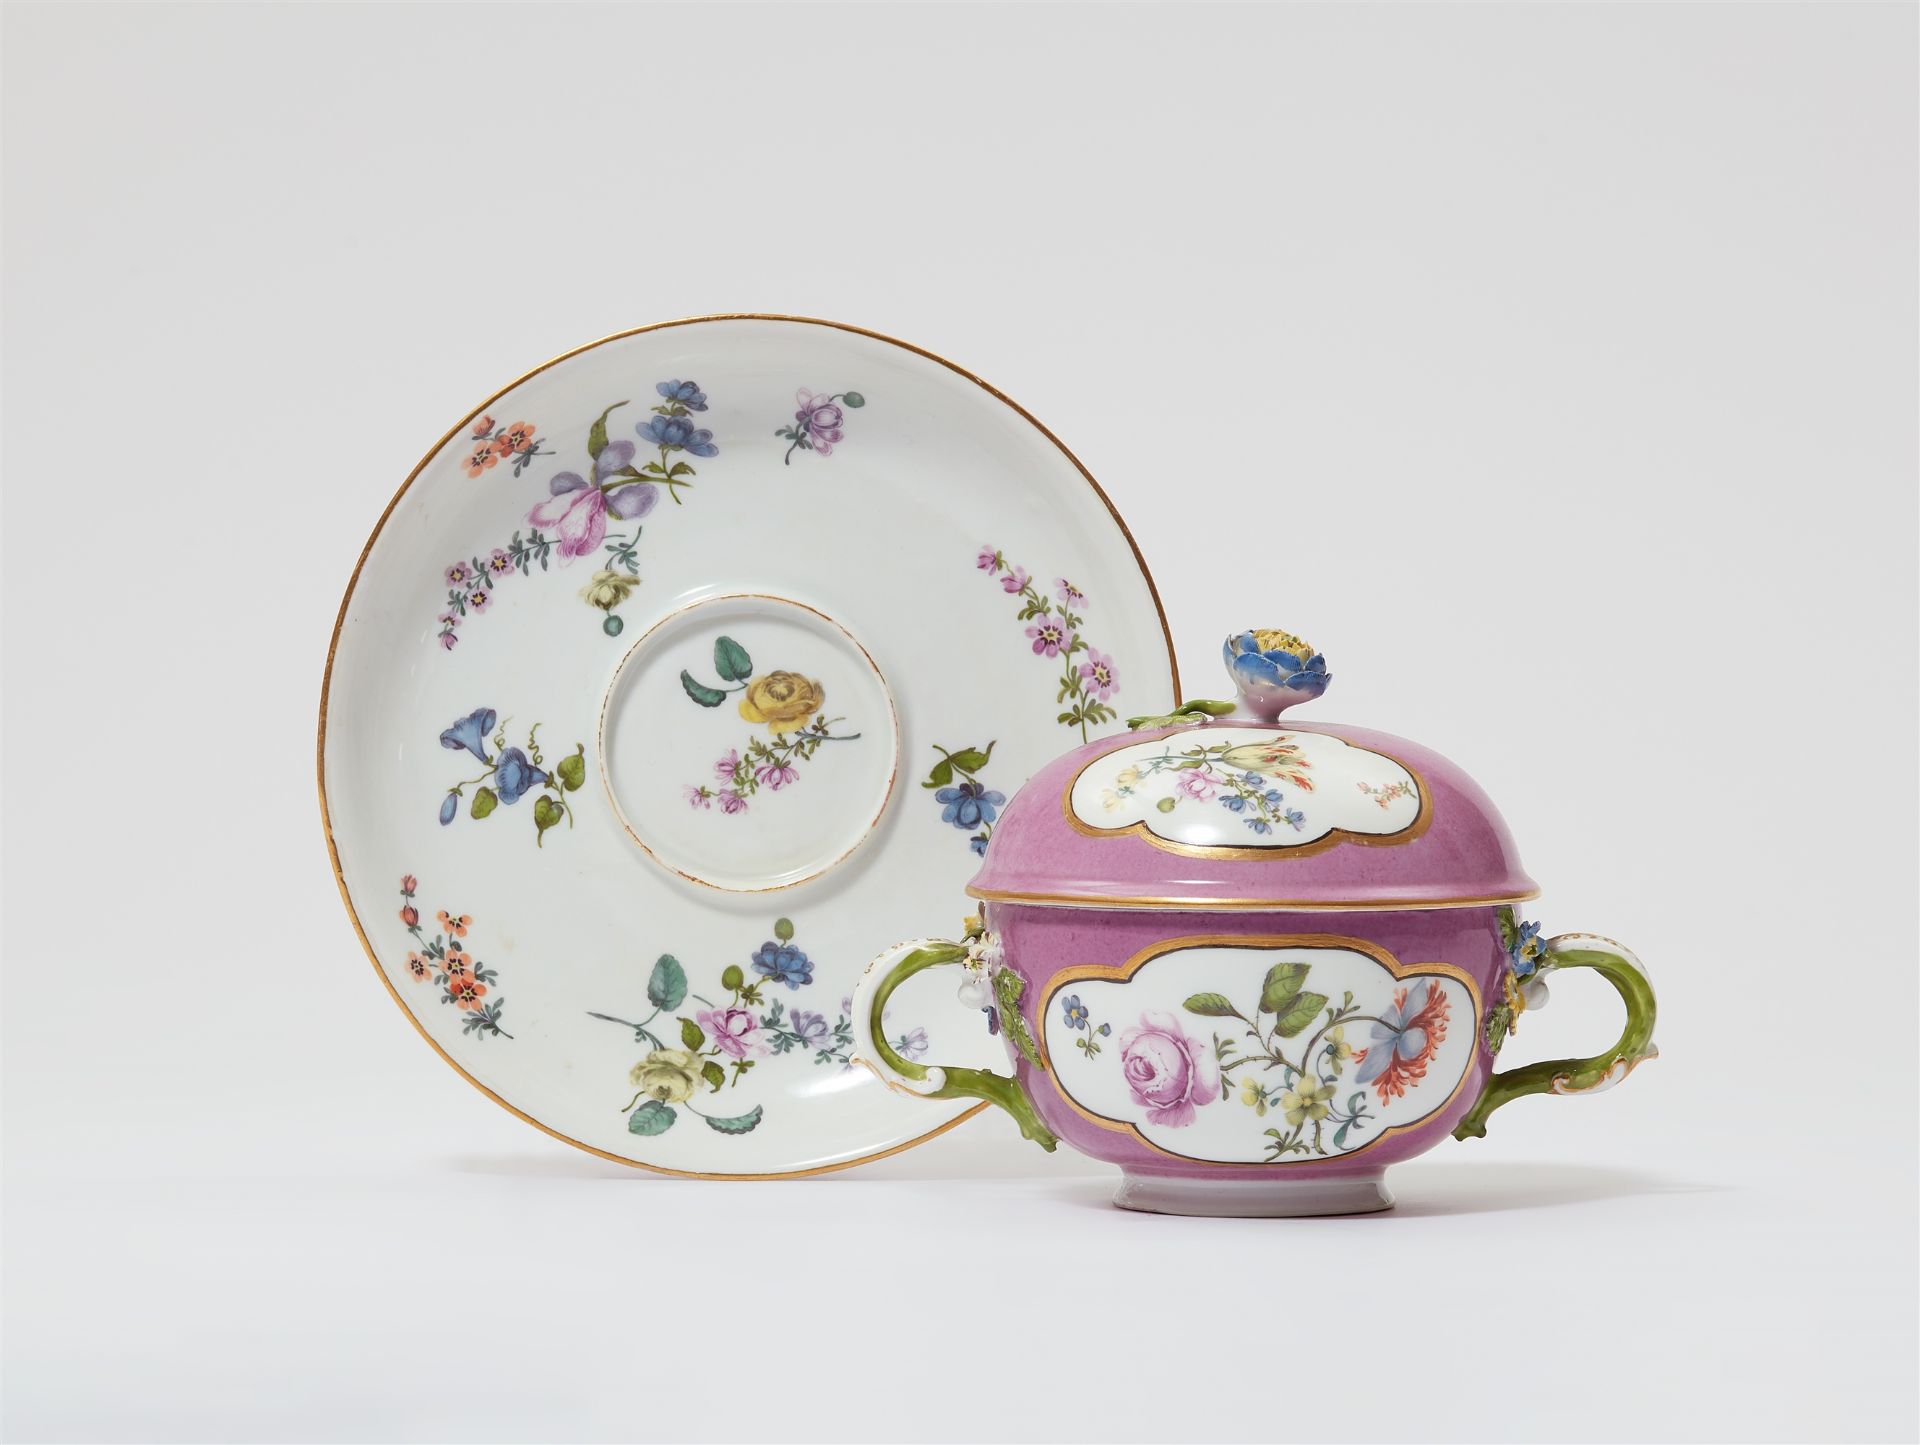 A Meissen porcelain ecuelle on stand - Image 2 of 2